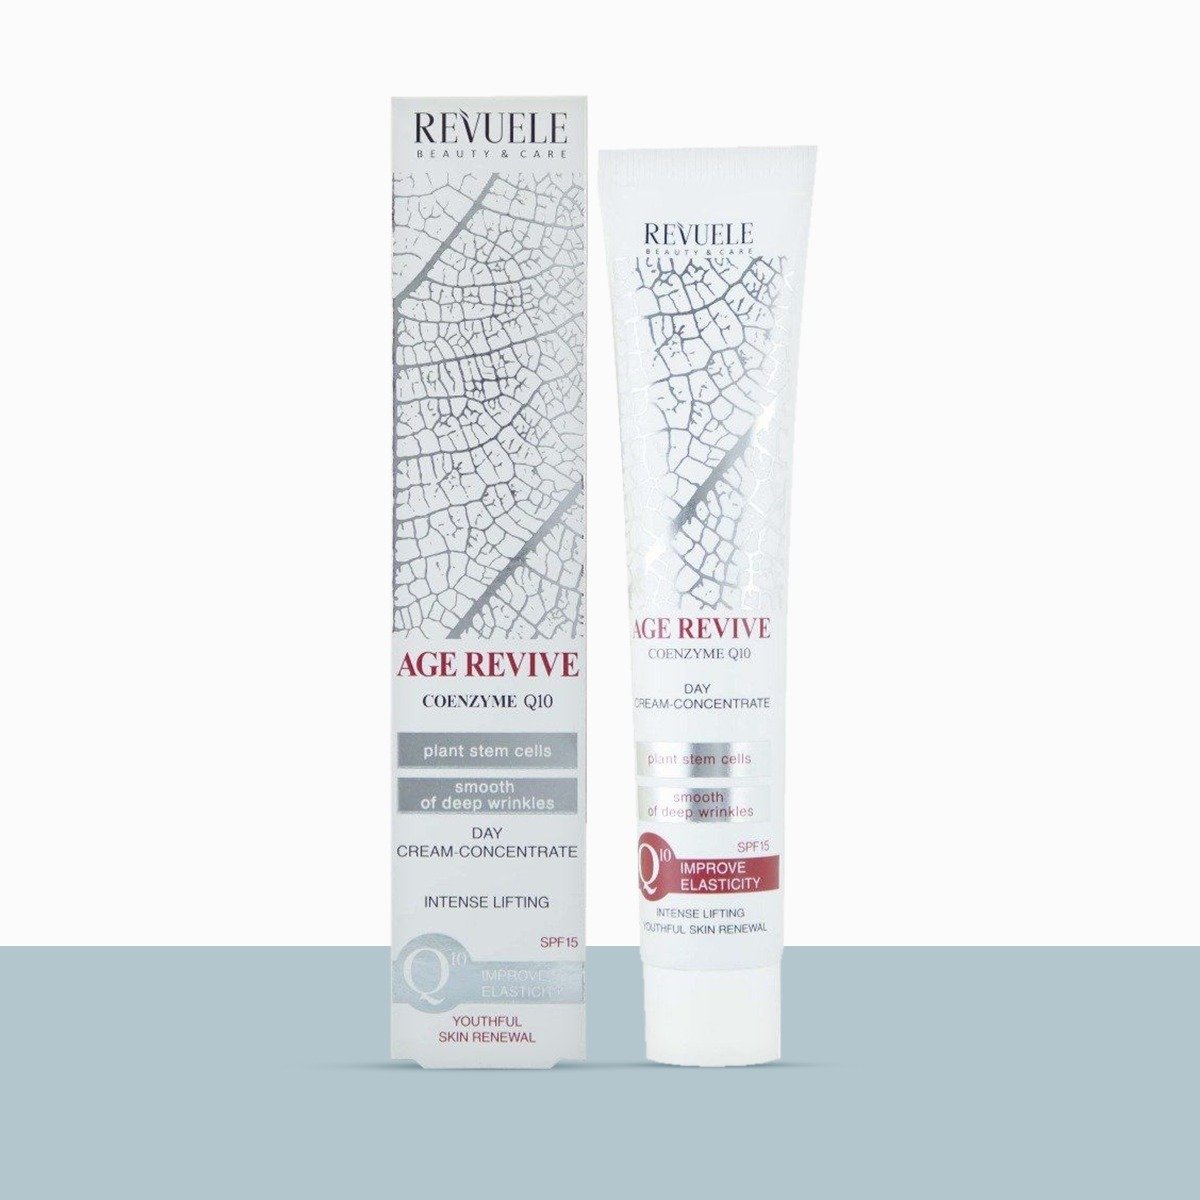 Revuele Coenzyme Q10 Age Revive Intense Lifting Concentrate Day Cream